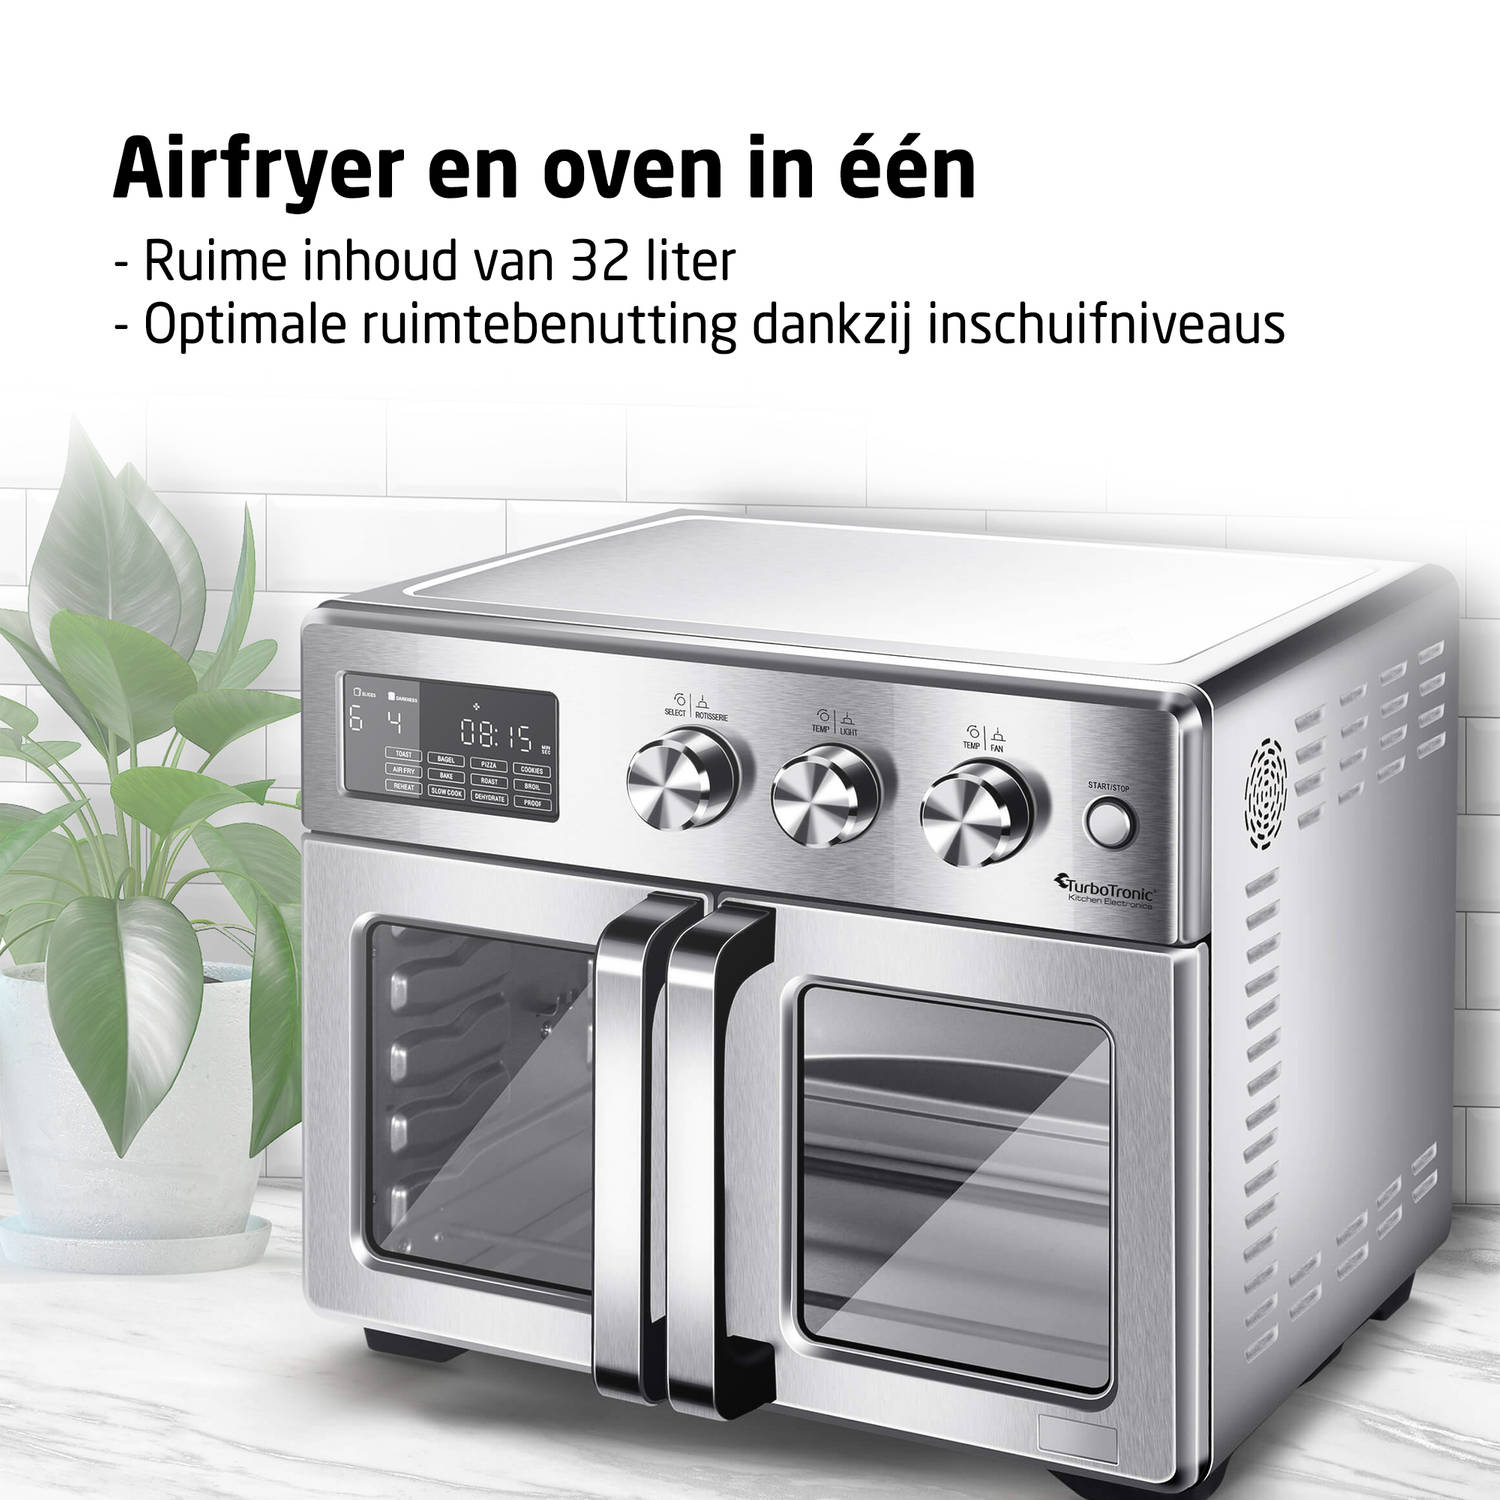 TurboTronic - Airfryer XXL y horno - Doble puerta - 32 litros - AFD32 